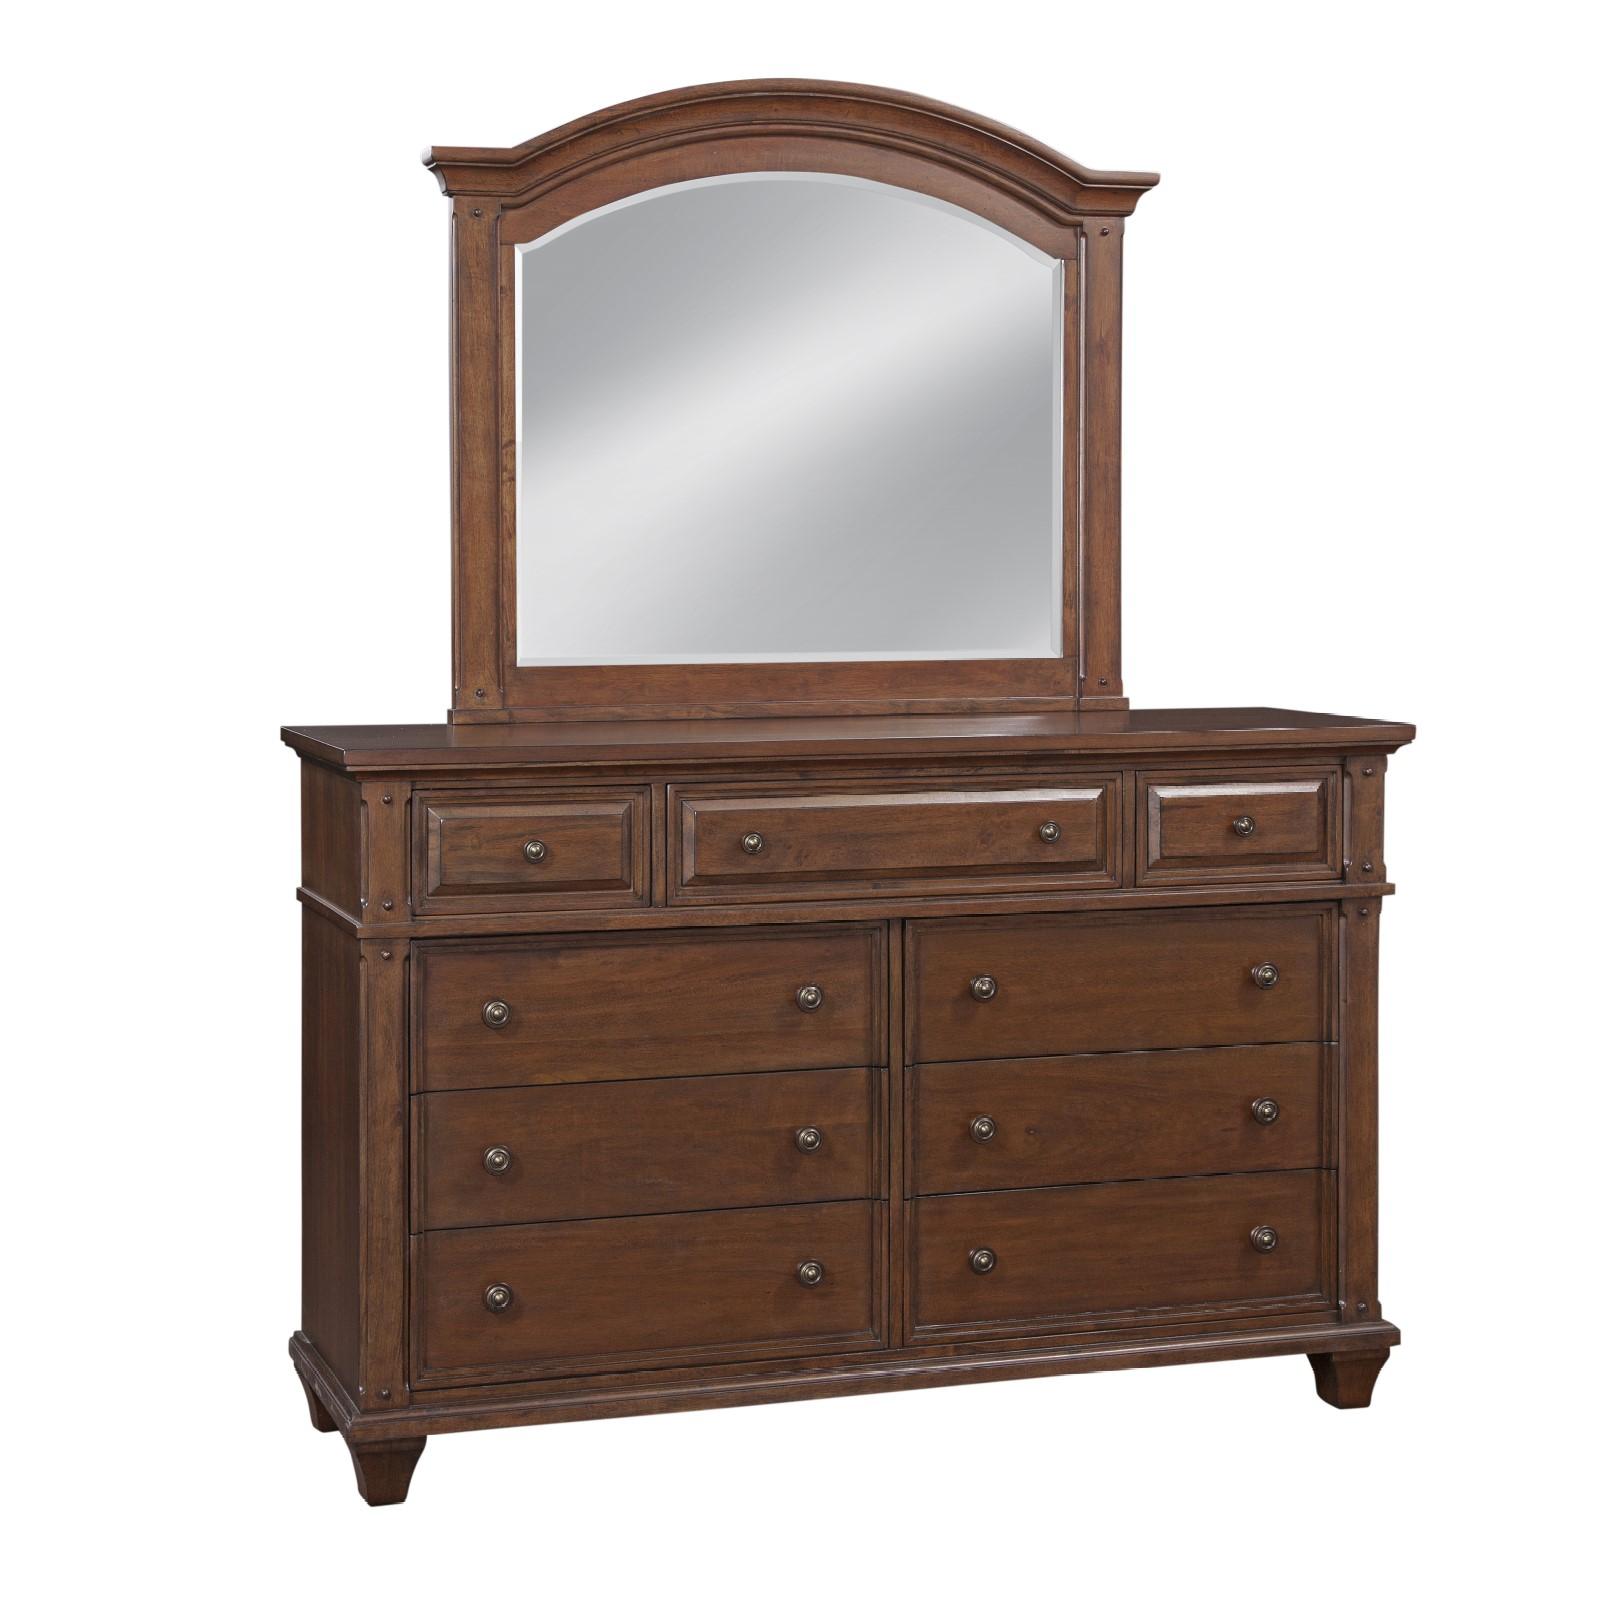 American Woodcrafters SEDONA 2400-DLM Dresser With Mirror